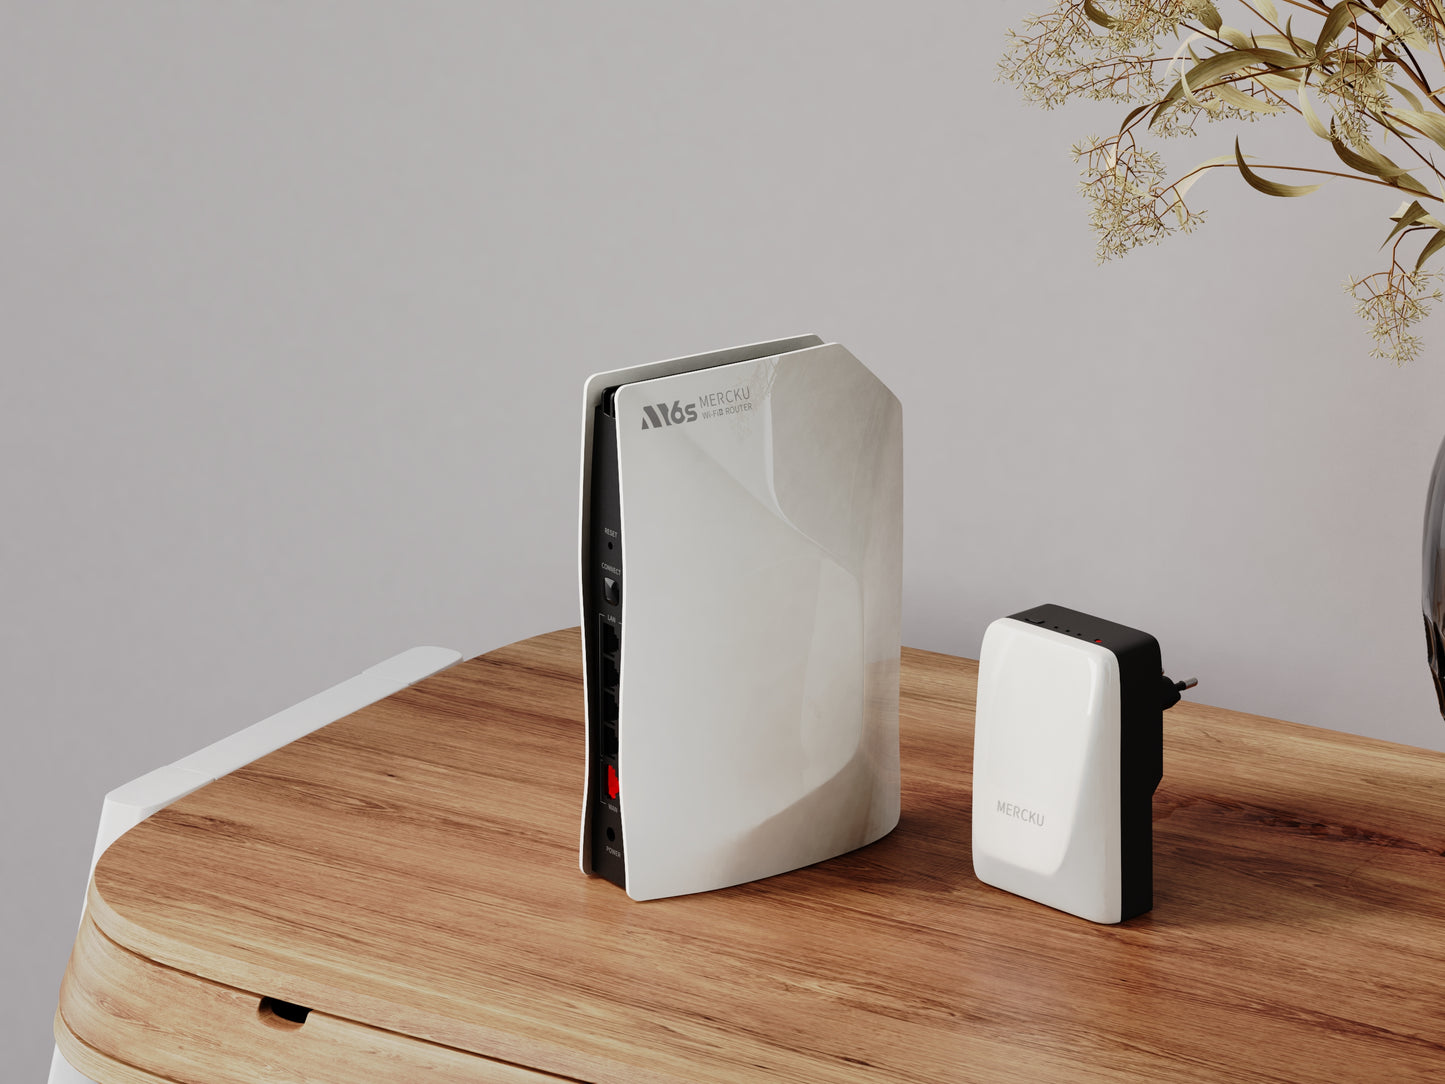 M6s AX3000 Mesh Router